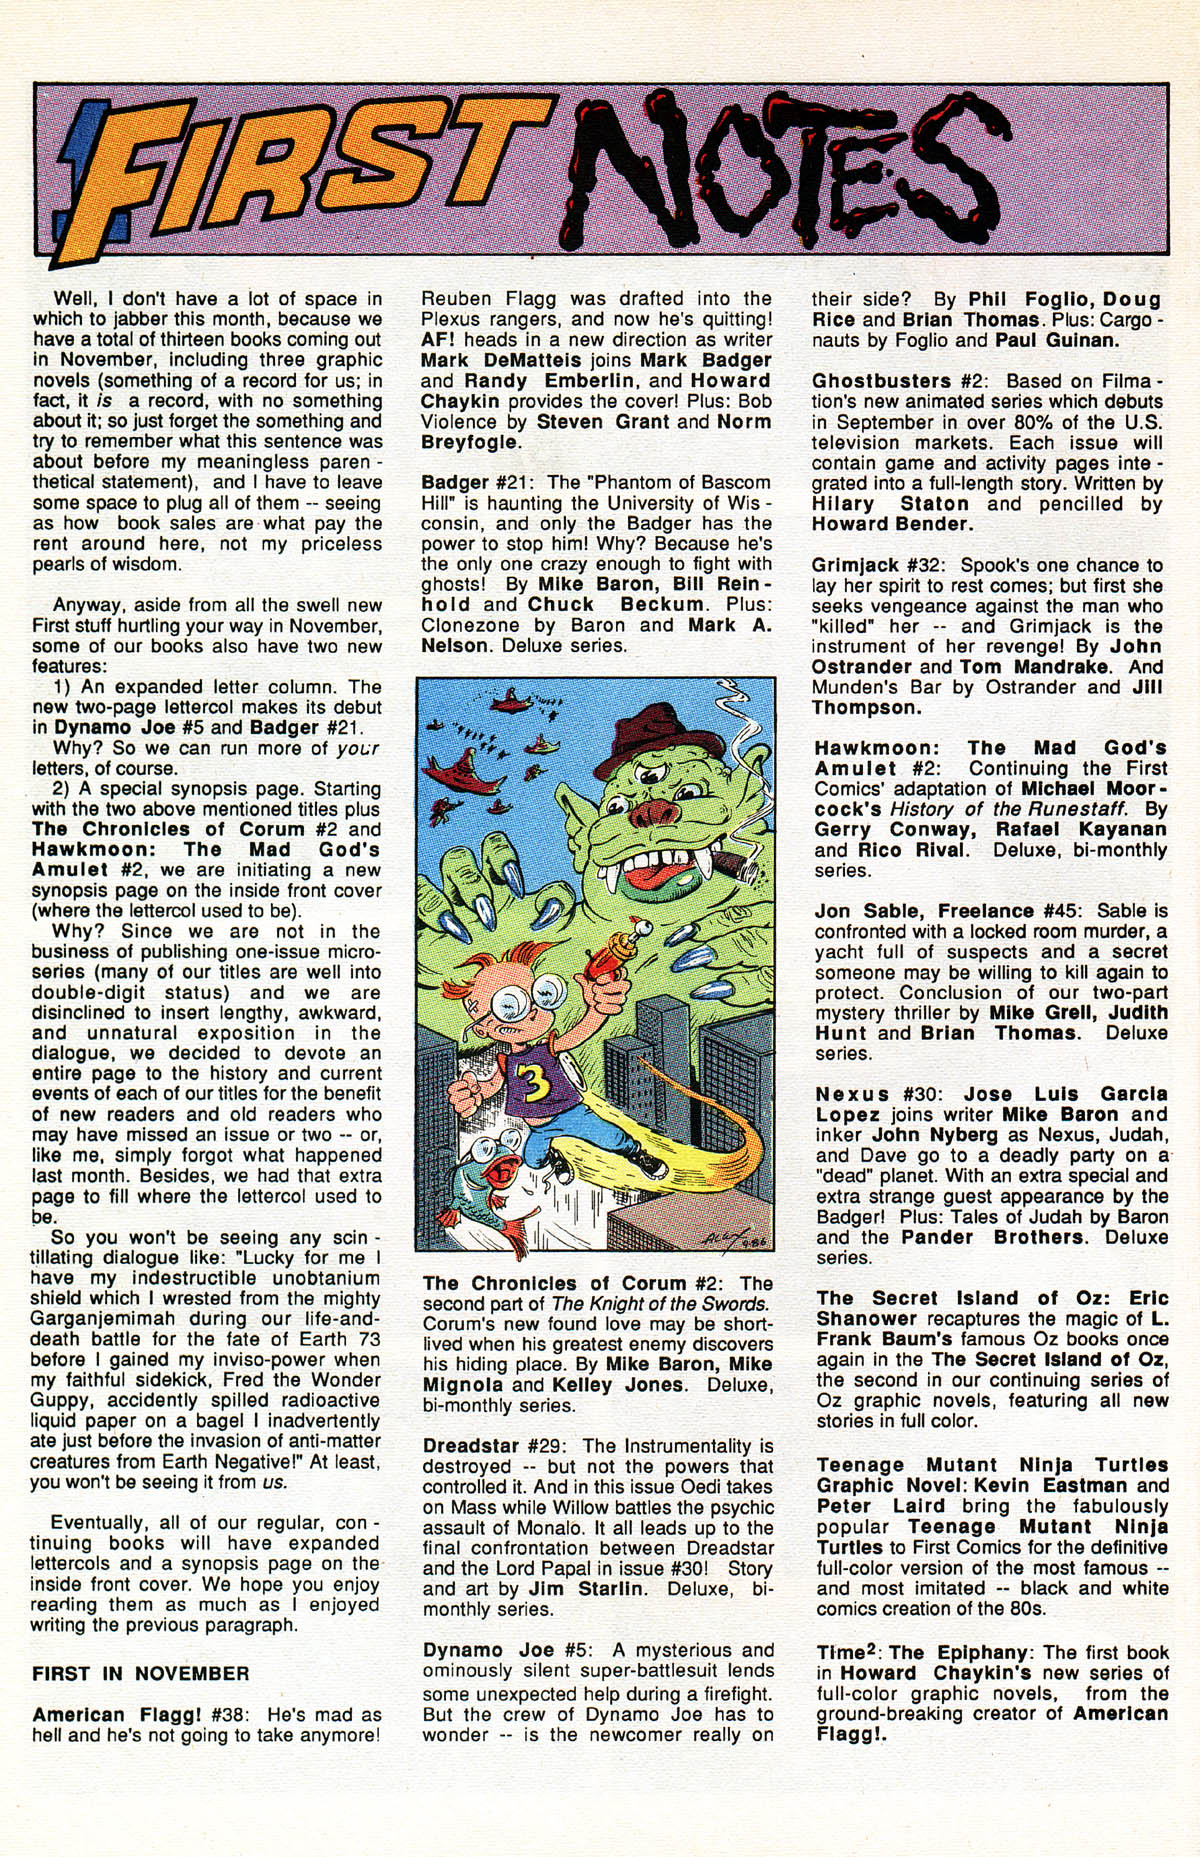 Read online American Flagg! comic -  Issue #38 - 14